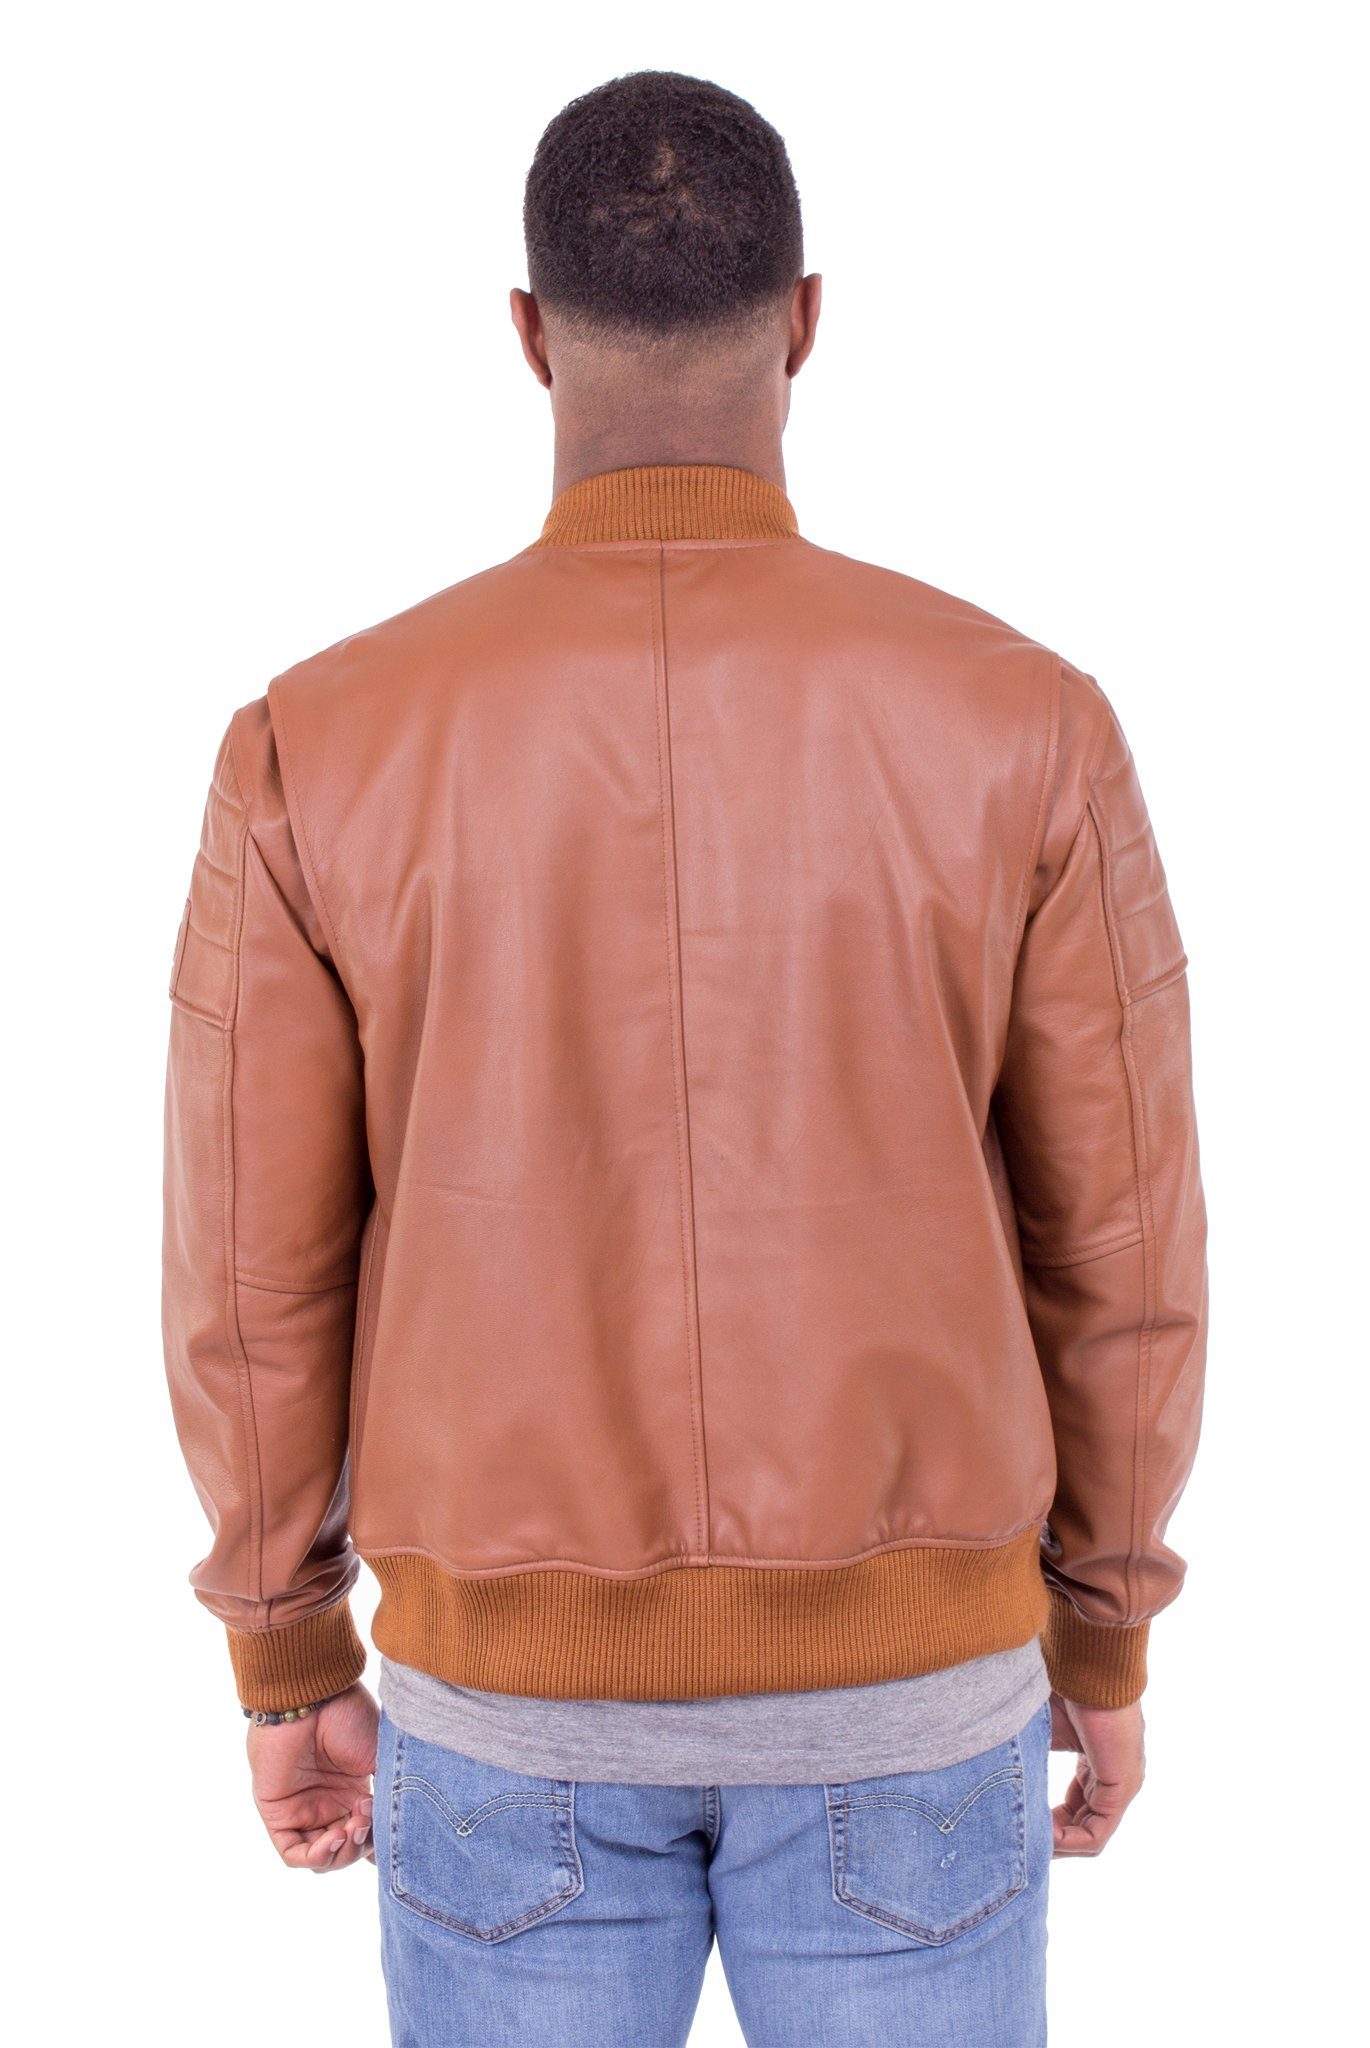 LAMBSKIN LEATHER RACER JACKET IN SALTED CARAMEL | Poor Little Rich Boy Clothing